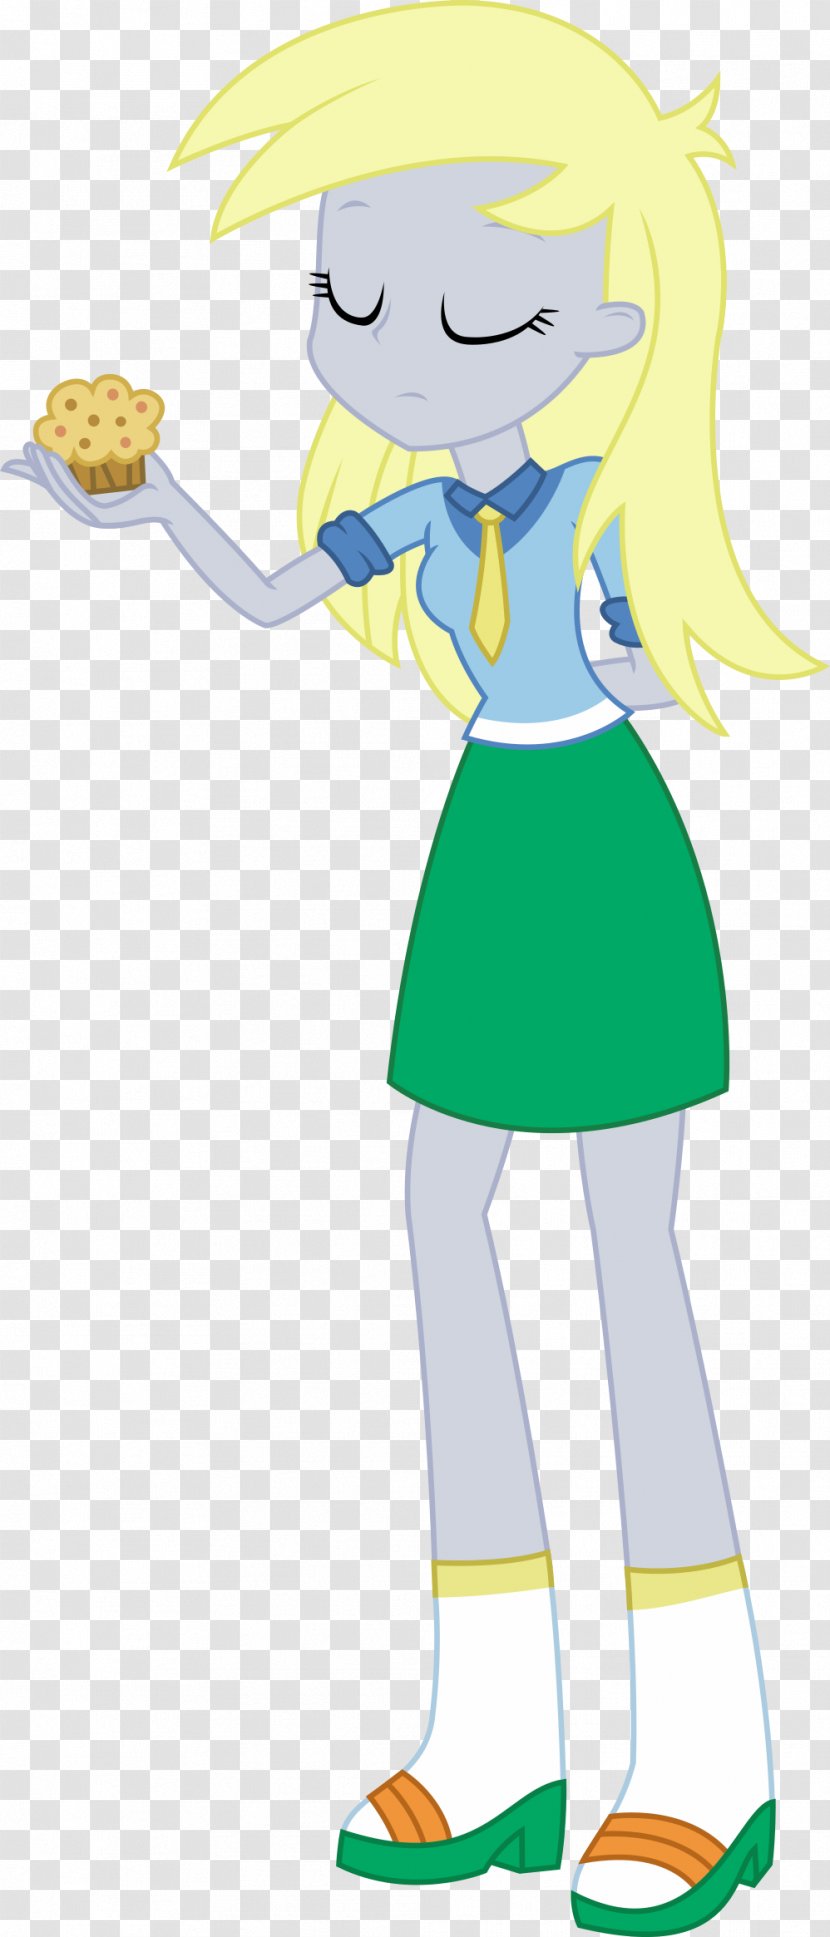 Derpy Hooves My Little Pony: Equestria Girls - Silhouette Transparent PNG